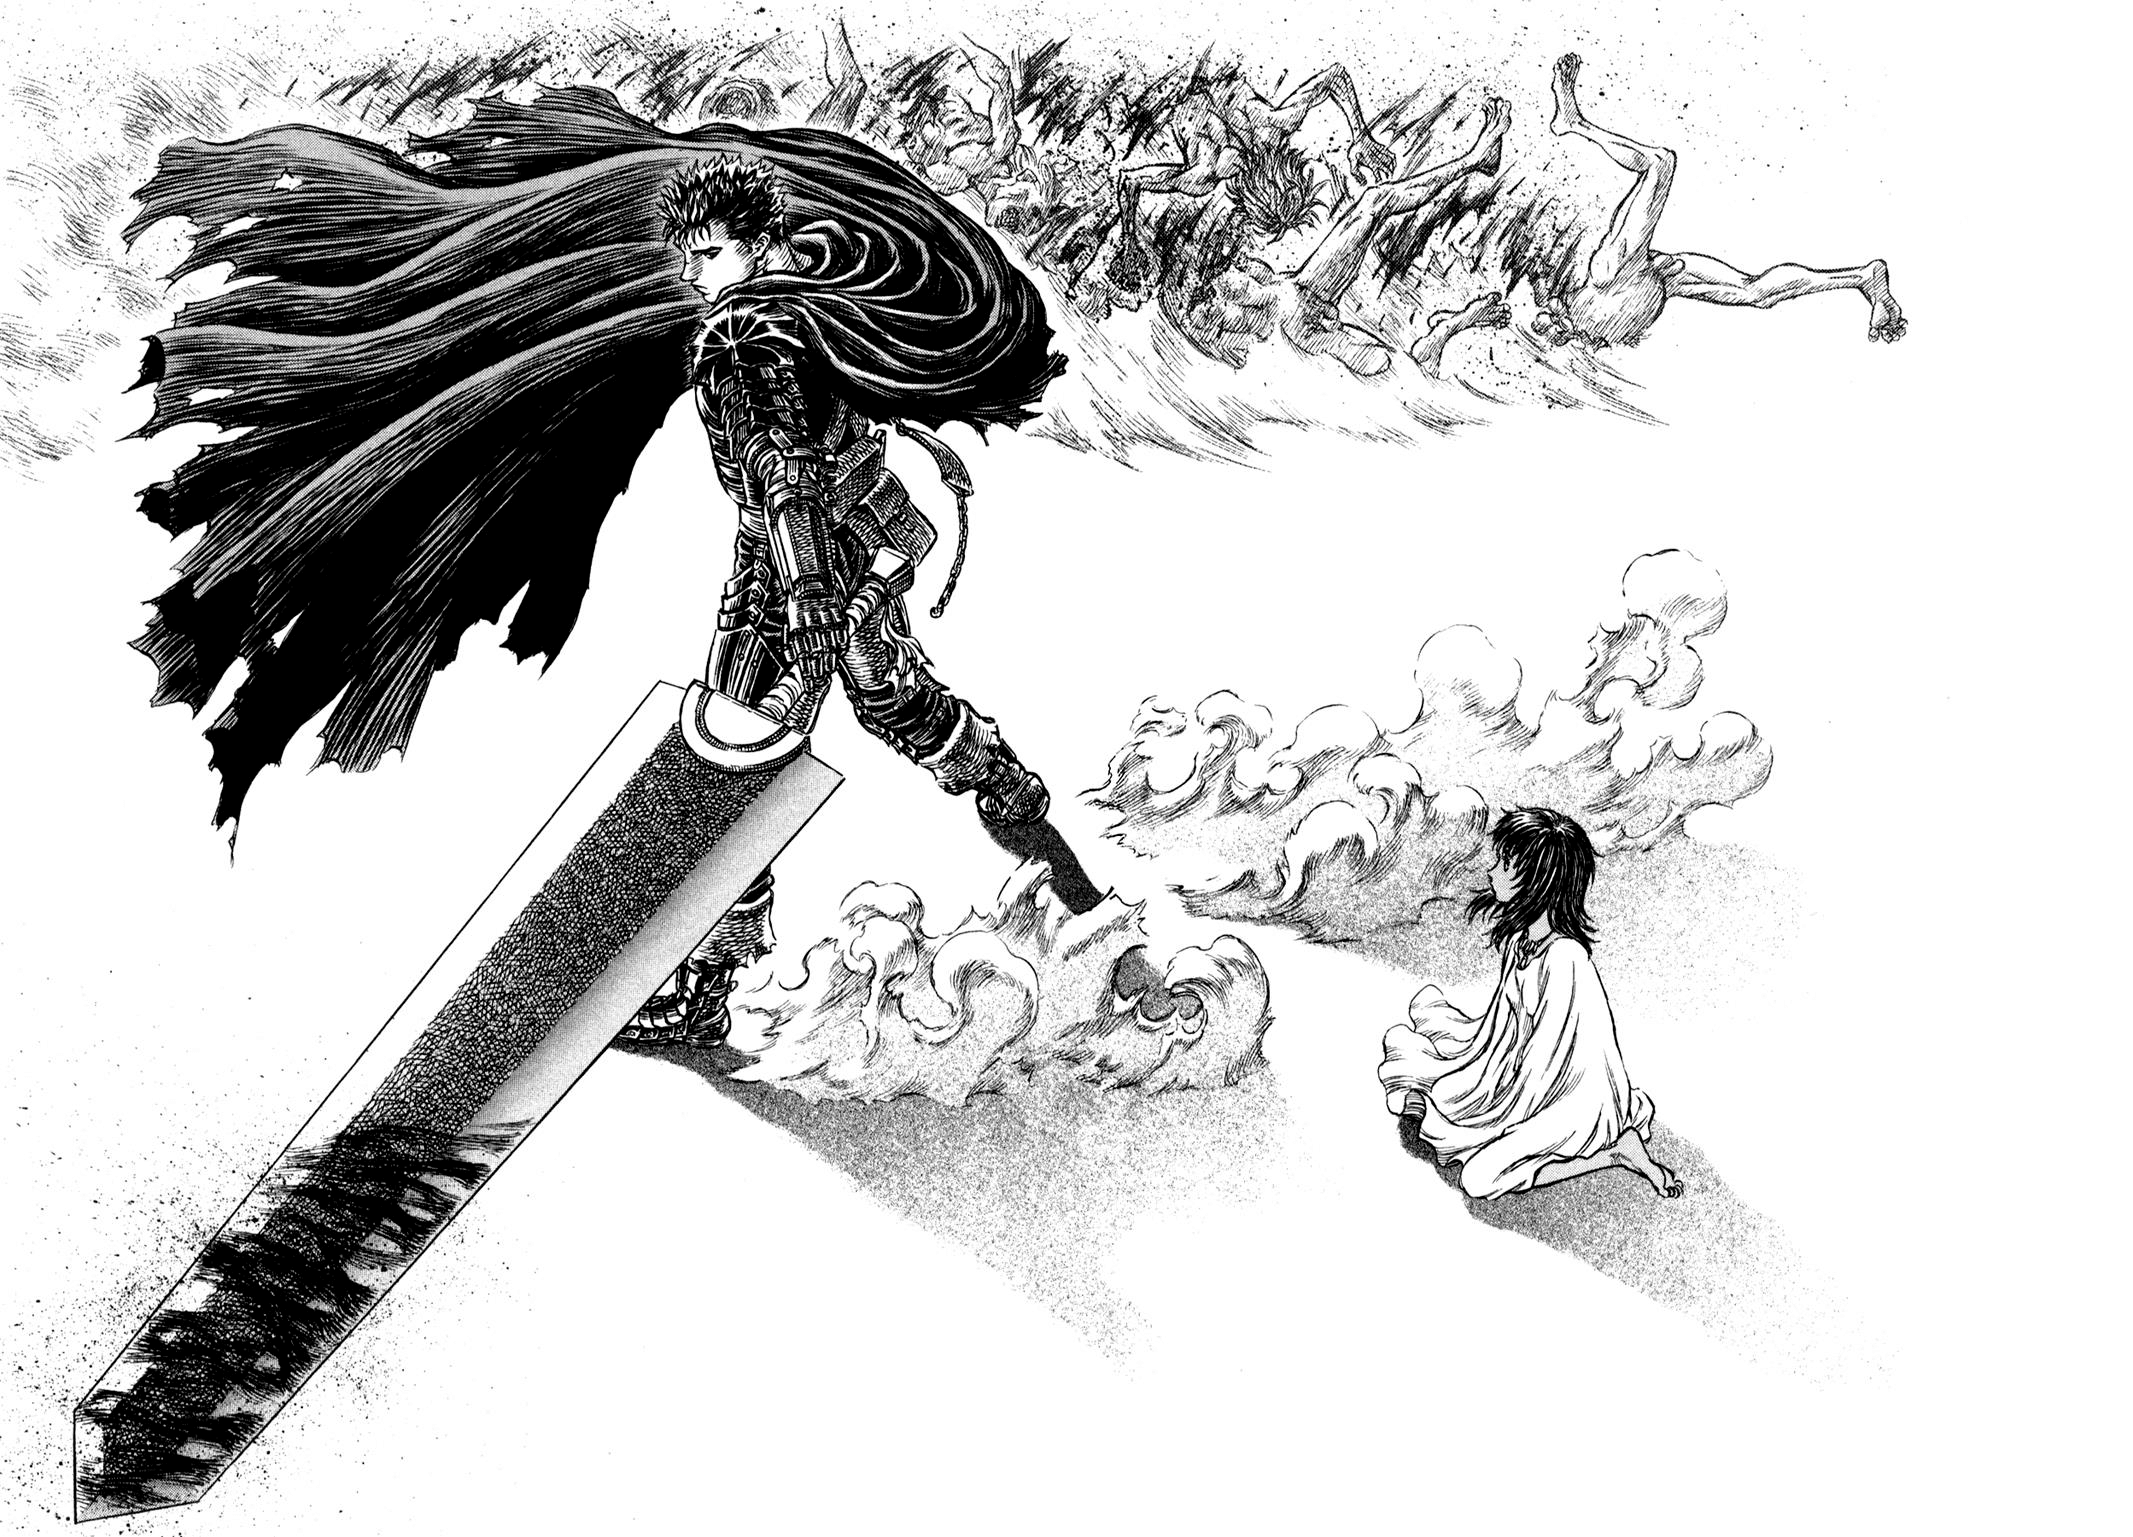 In Berserk, would Guts's pre eclipse sword (the sword he used before he  picked up the Dragon Slayer) be something an actual human could handle? Is  there a historically similar sword that